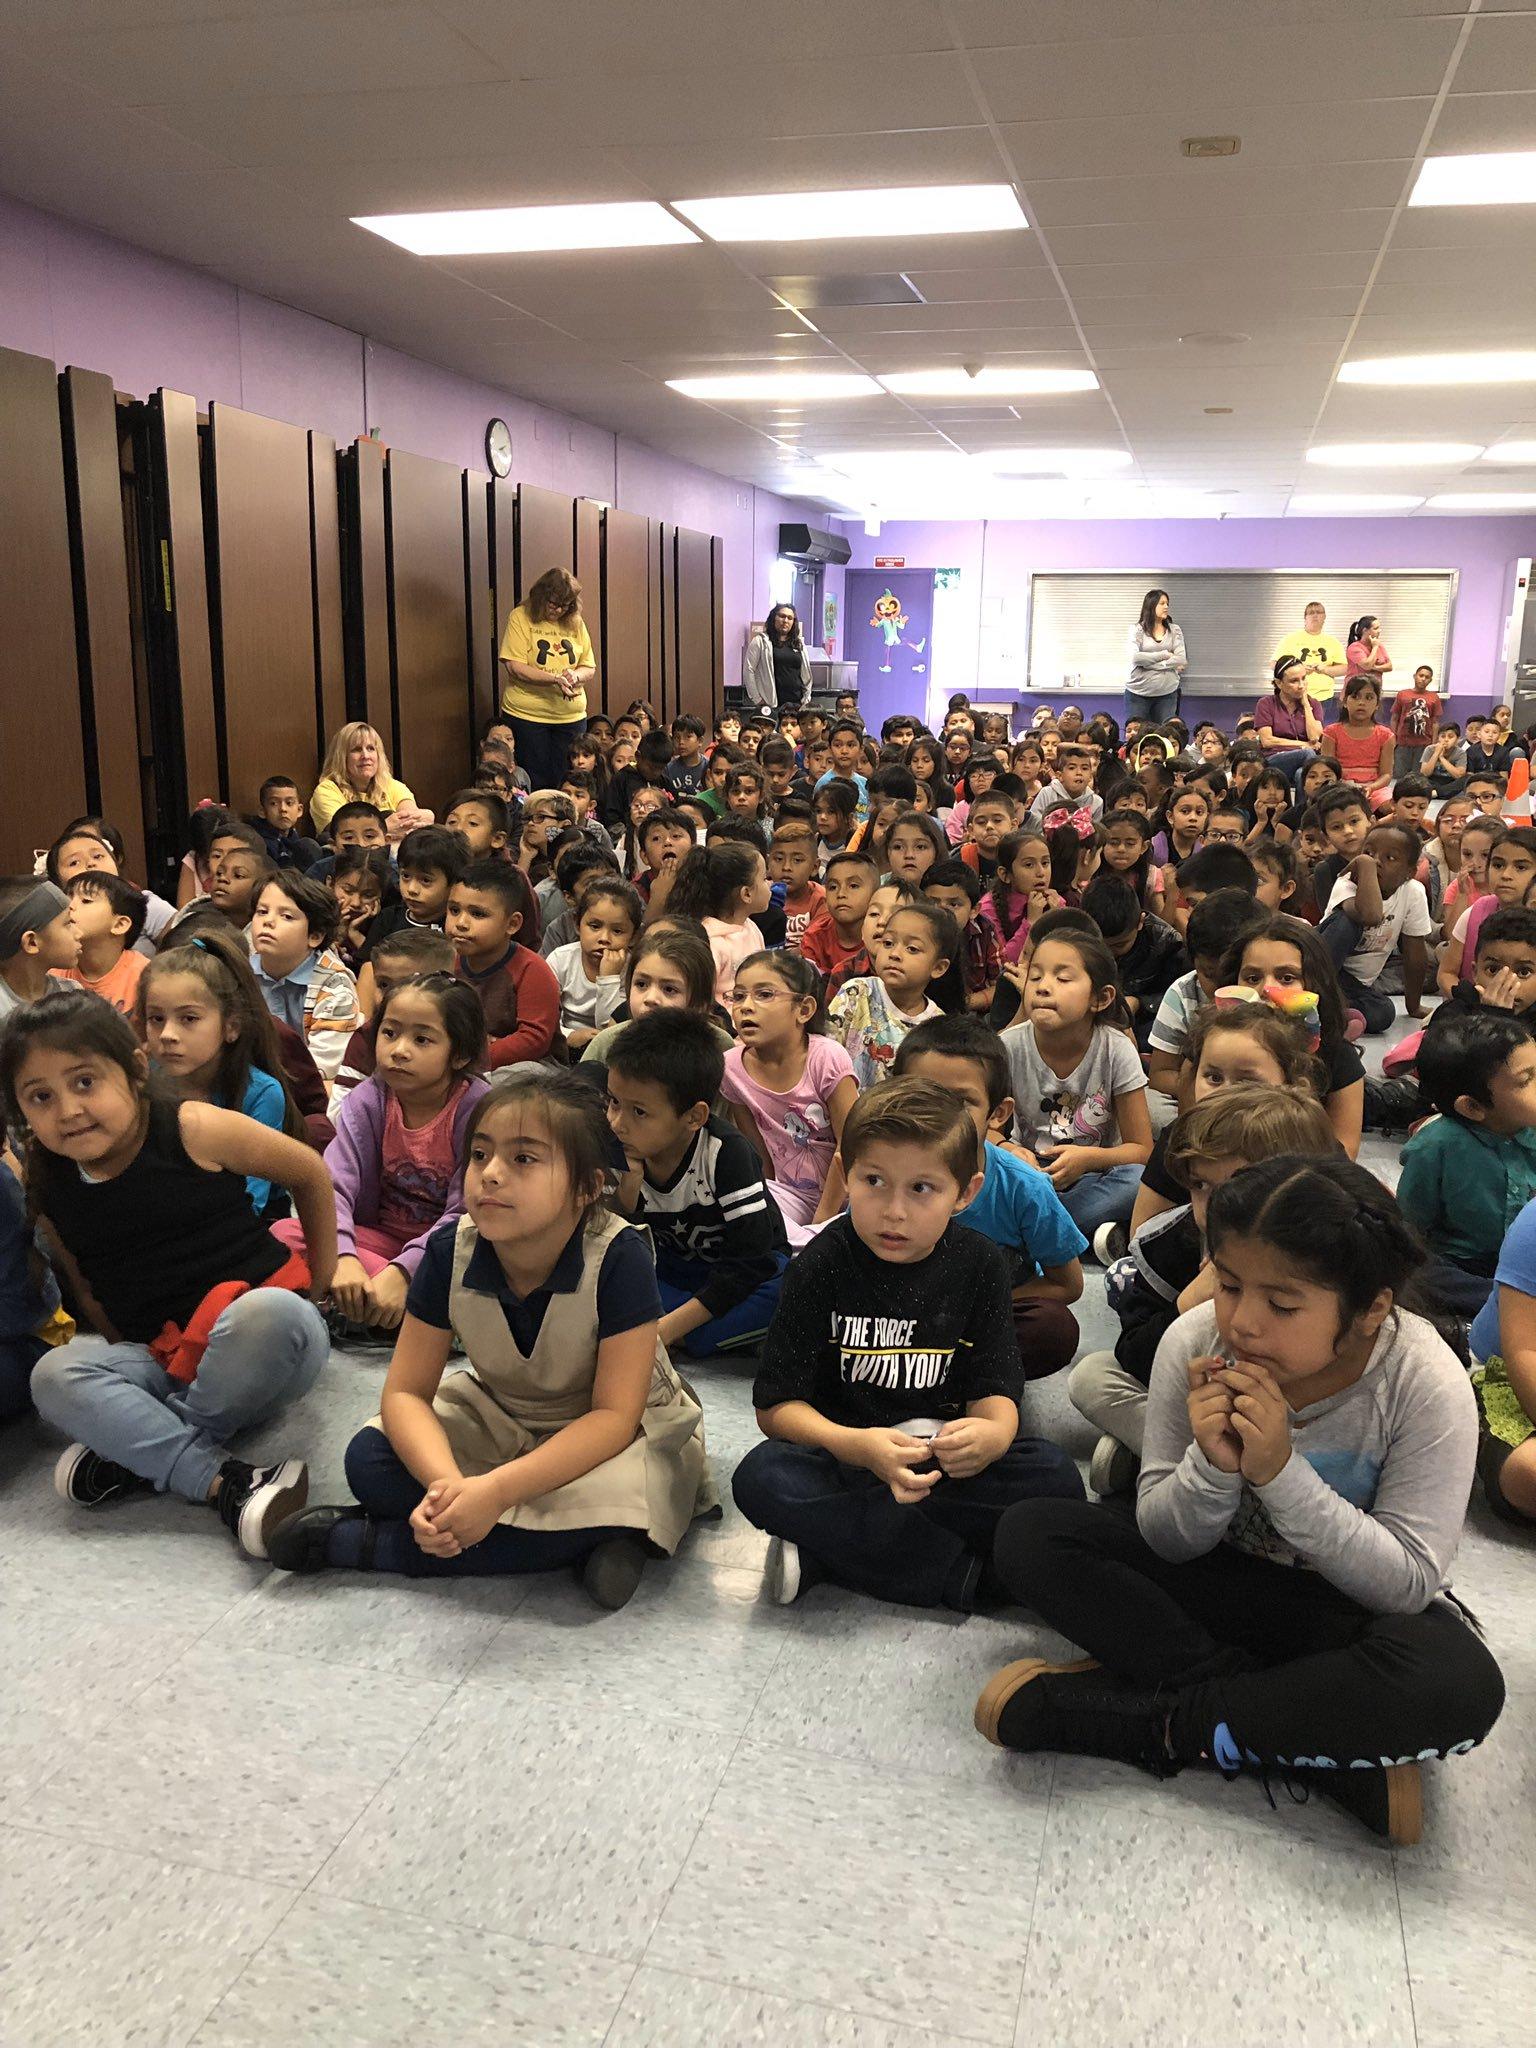 Tigers at assembly, students pledge to be kind